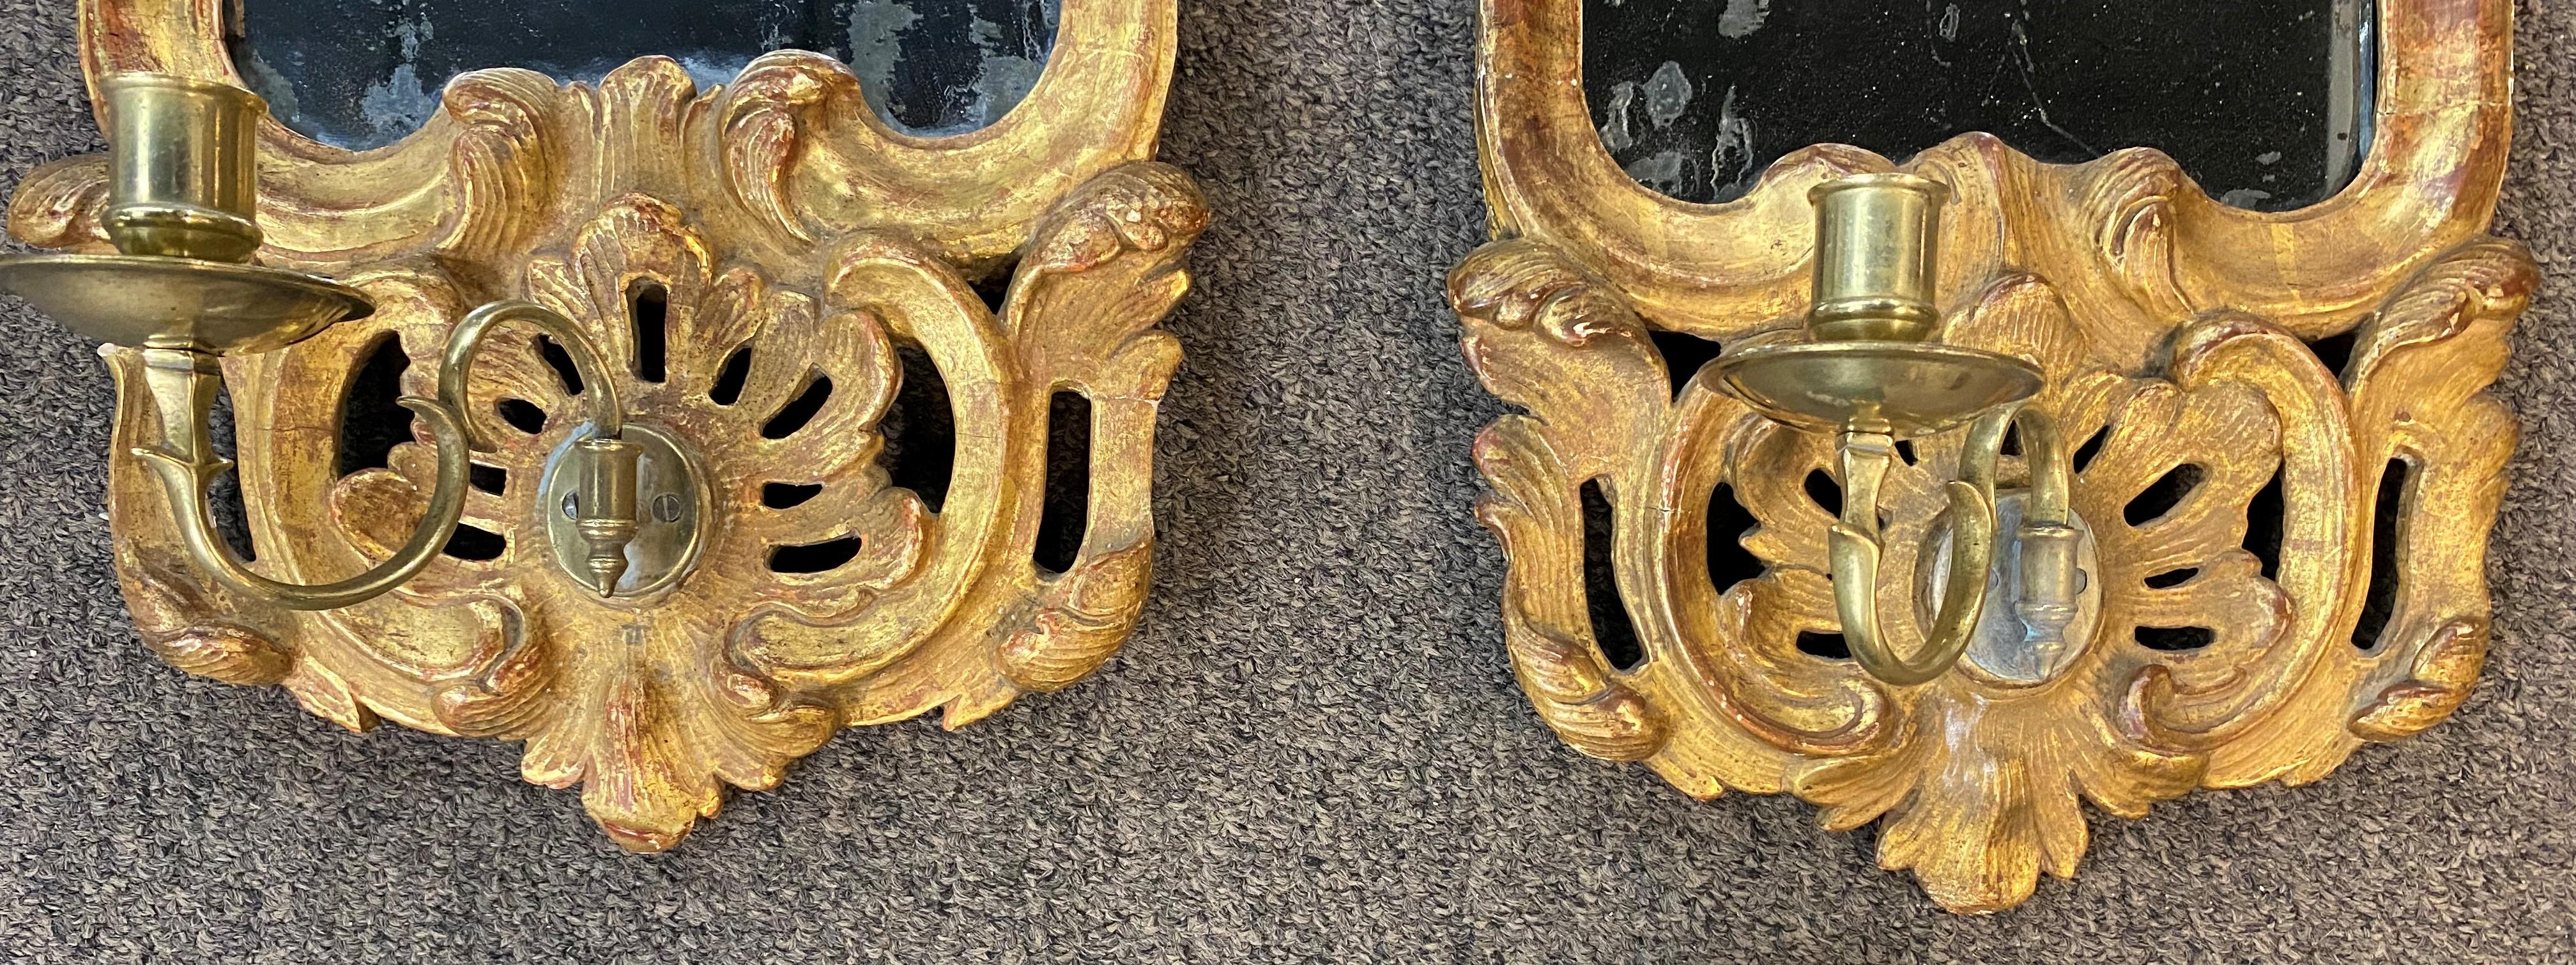 Plated Exceptional 18th c Pair of Gilded Girandole Mirrored Sconces, Likely Swedish For Sale